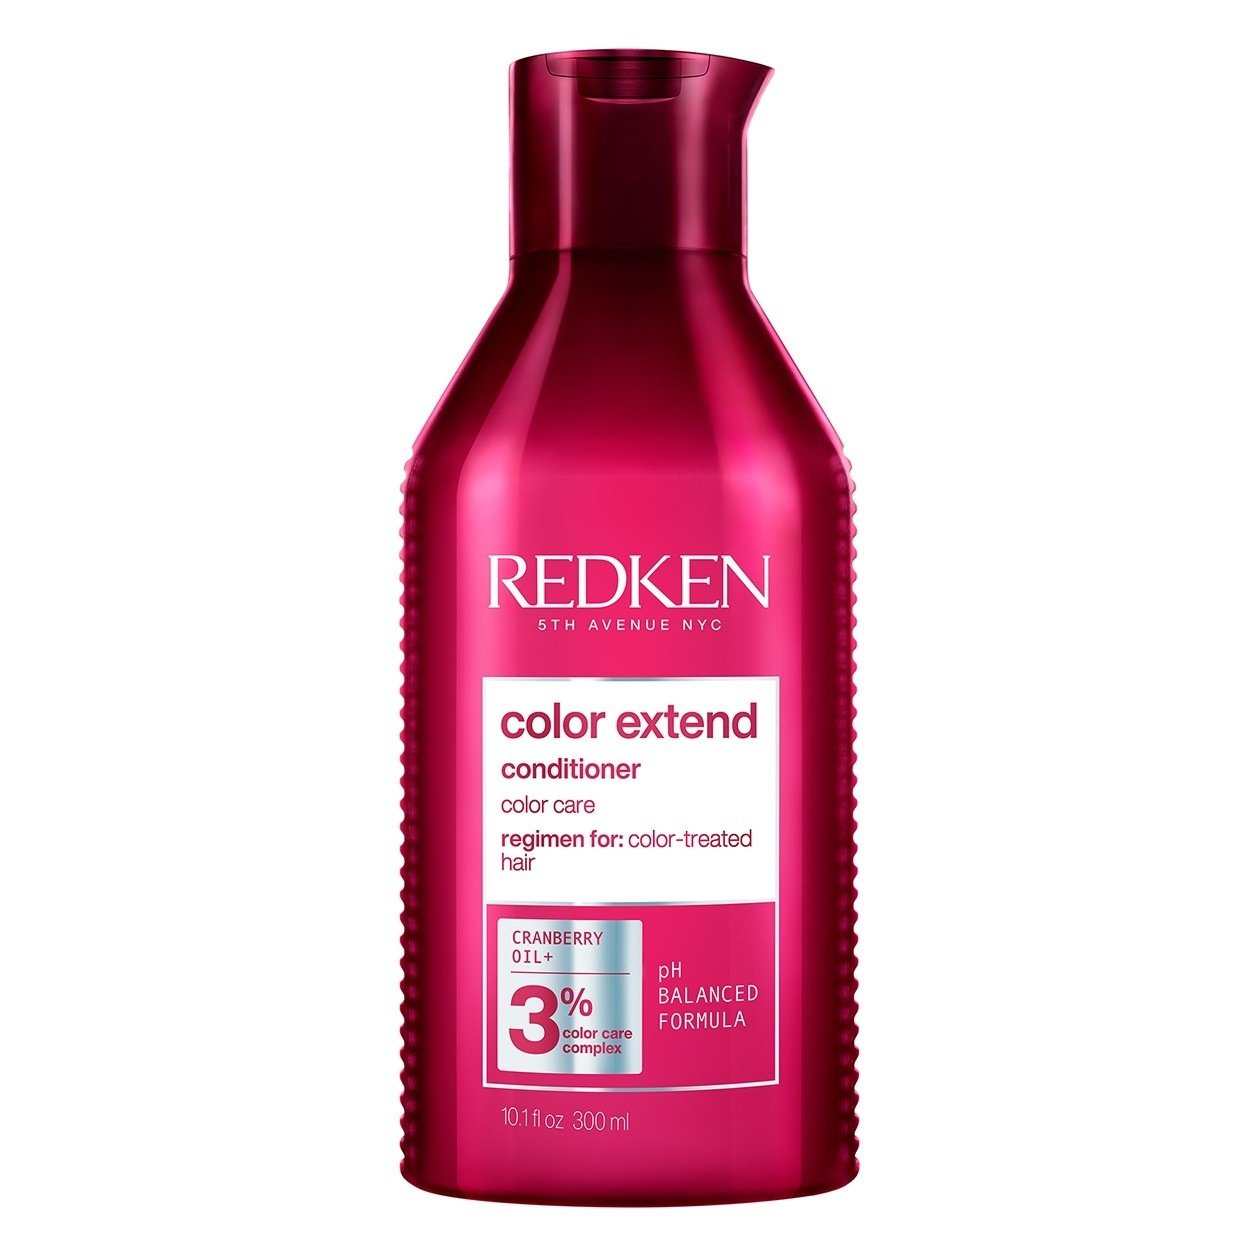 Redken Color Extend Conditioner | For Color-Treated Hair | Detangles & Smooths Hair While Protecting Color From Fading 33.8 Fl Oz